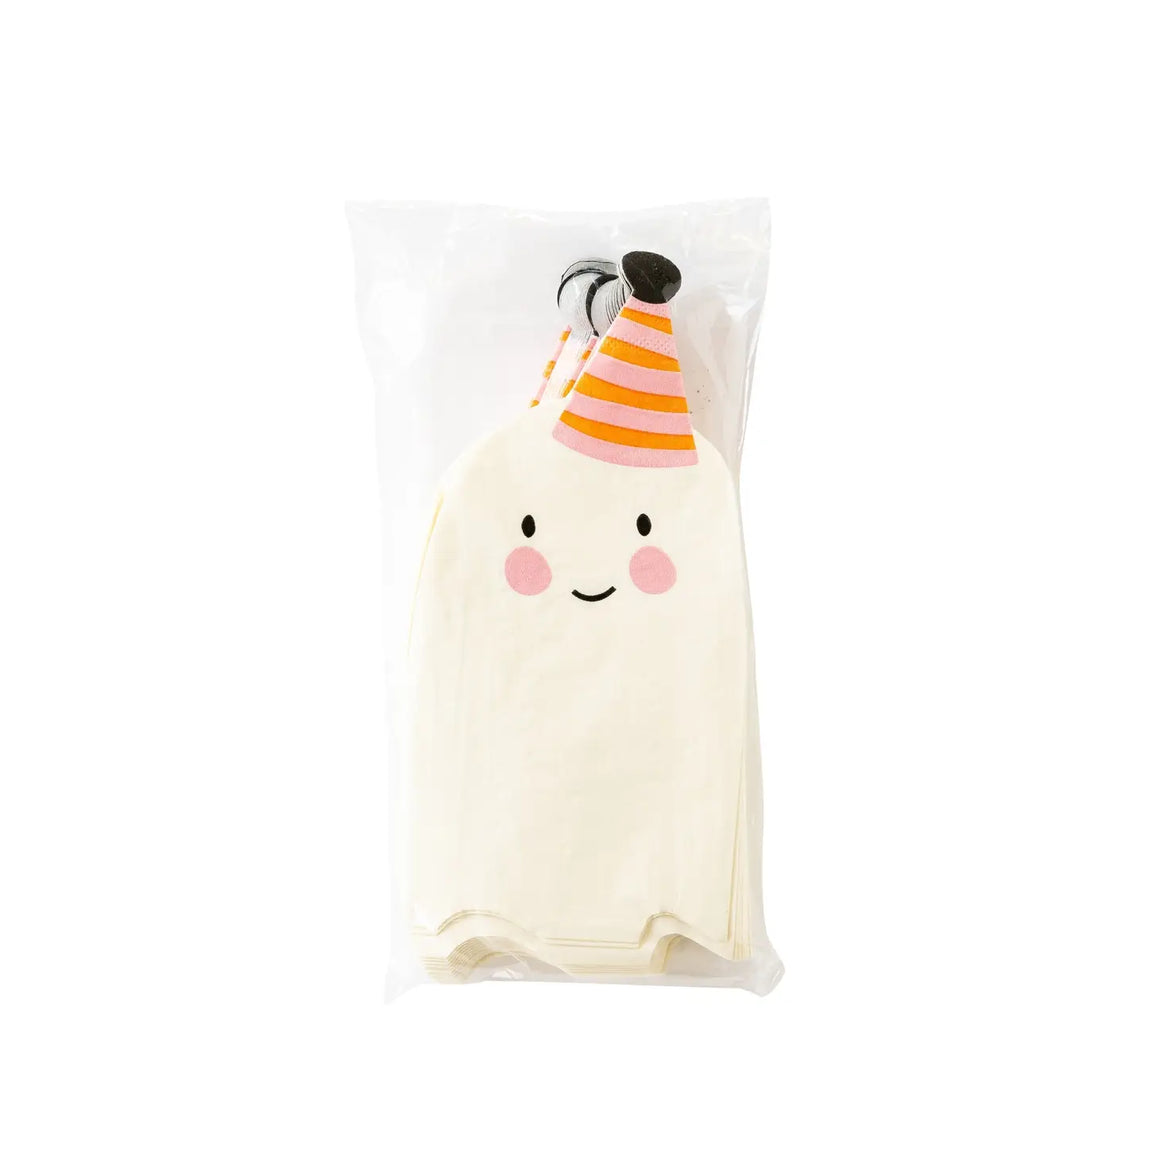 NAPKINS SMALL - HALLOWEEN GHOST PARTY